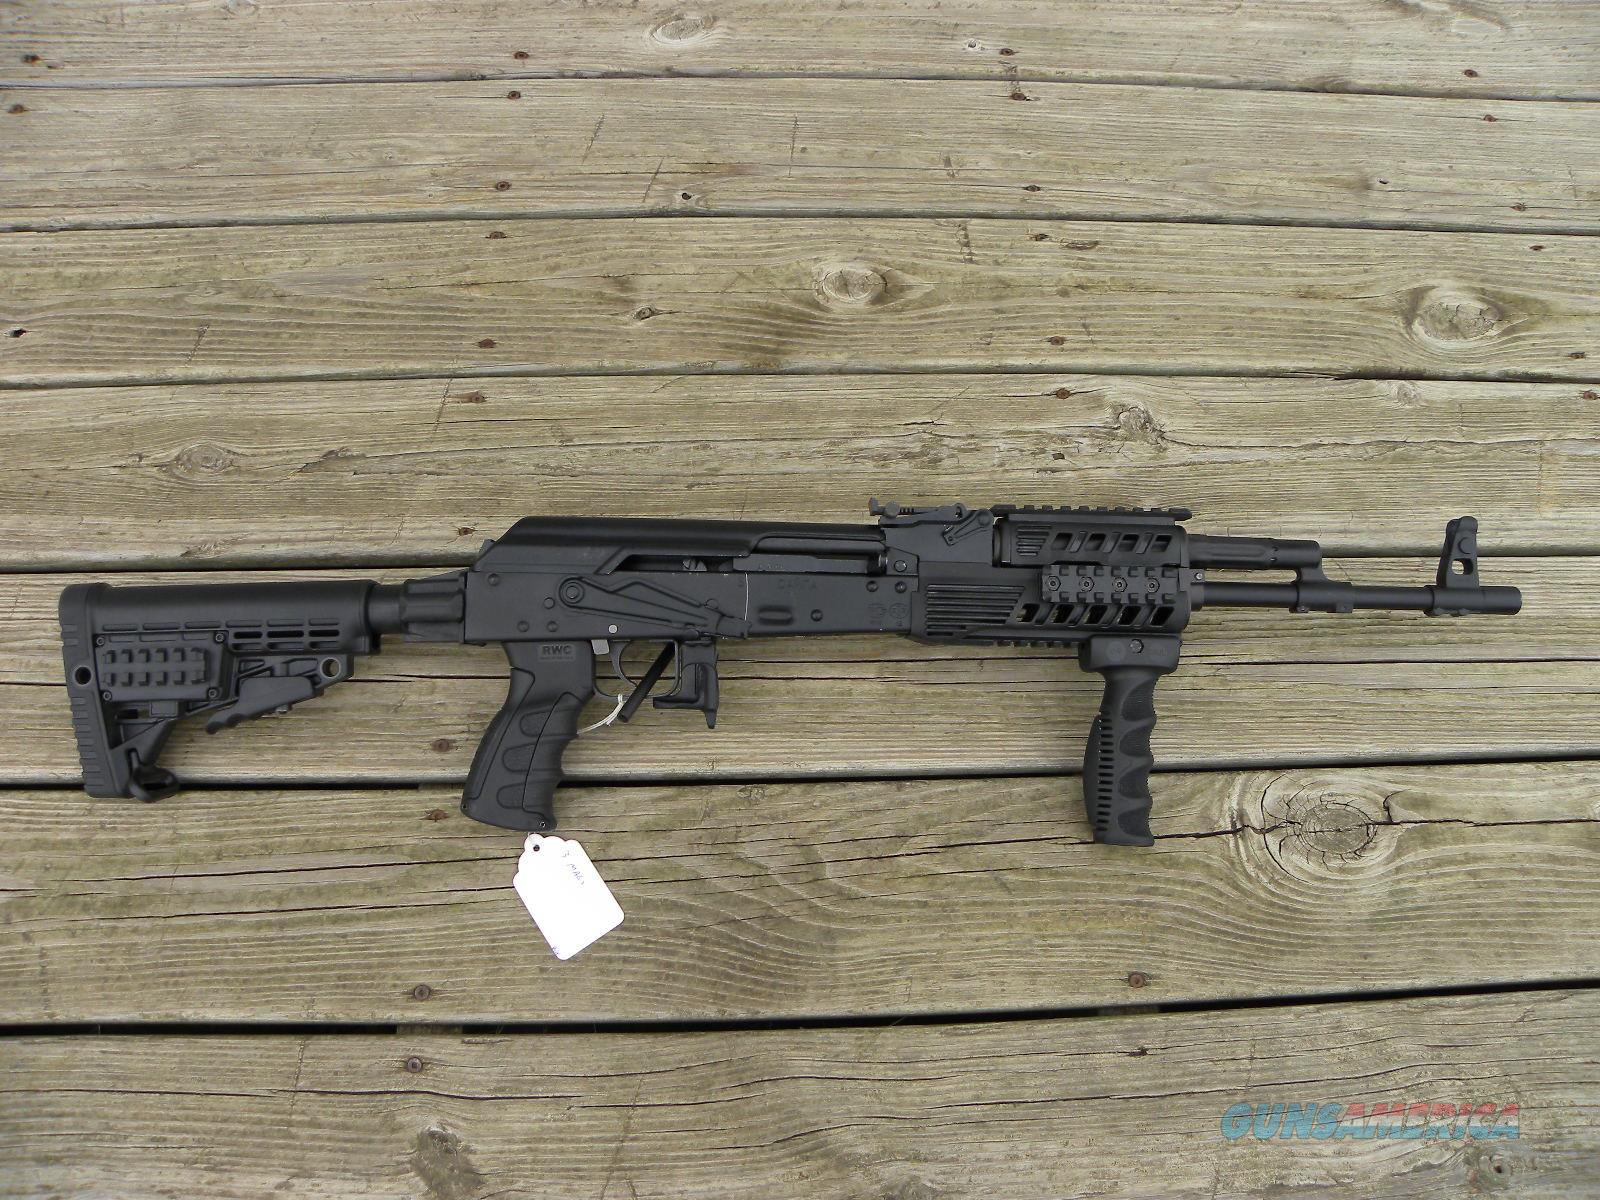 Saiga Ak 47 Upgraded Furniture 3 Mags 7 62x39 For Sale